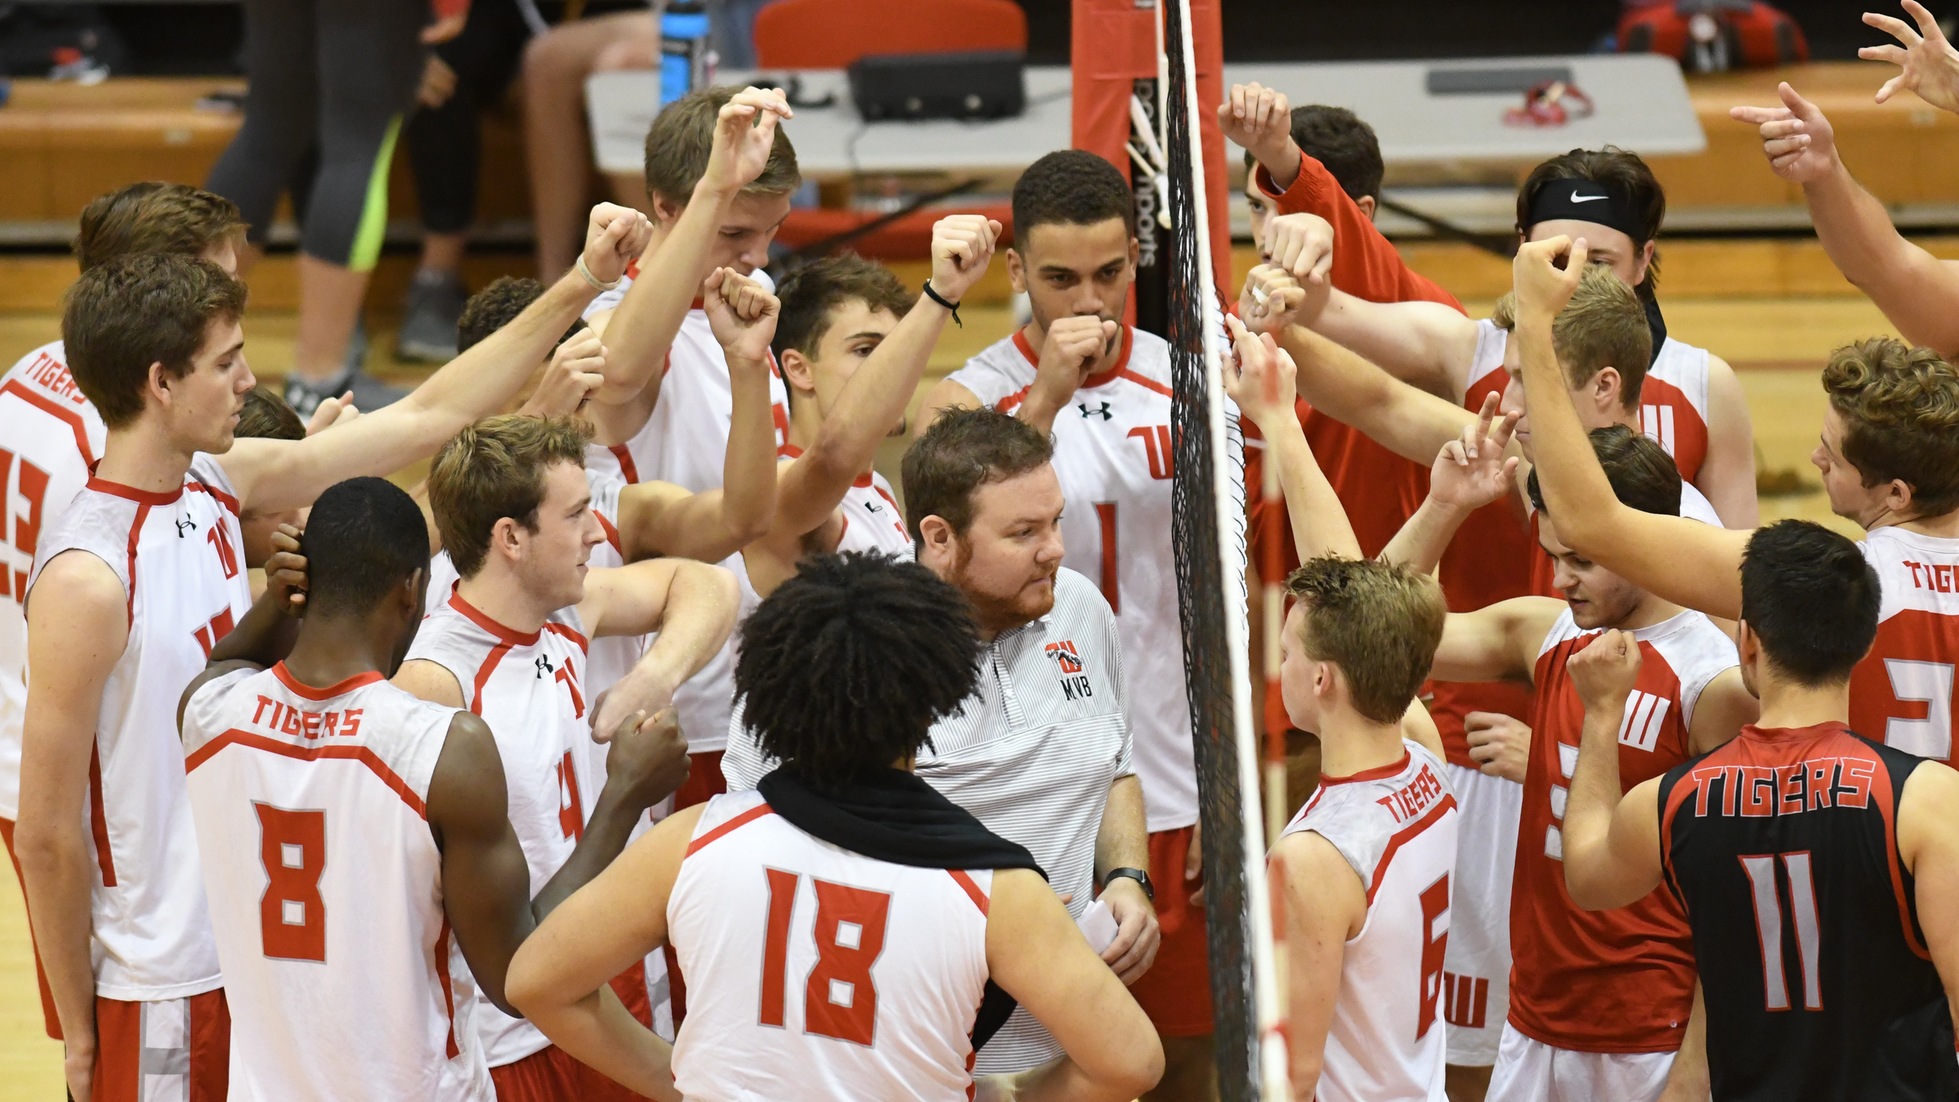 Men's Volleyball Splits Day With Fontbonne & Hiram